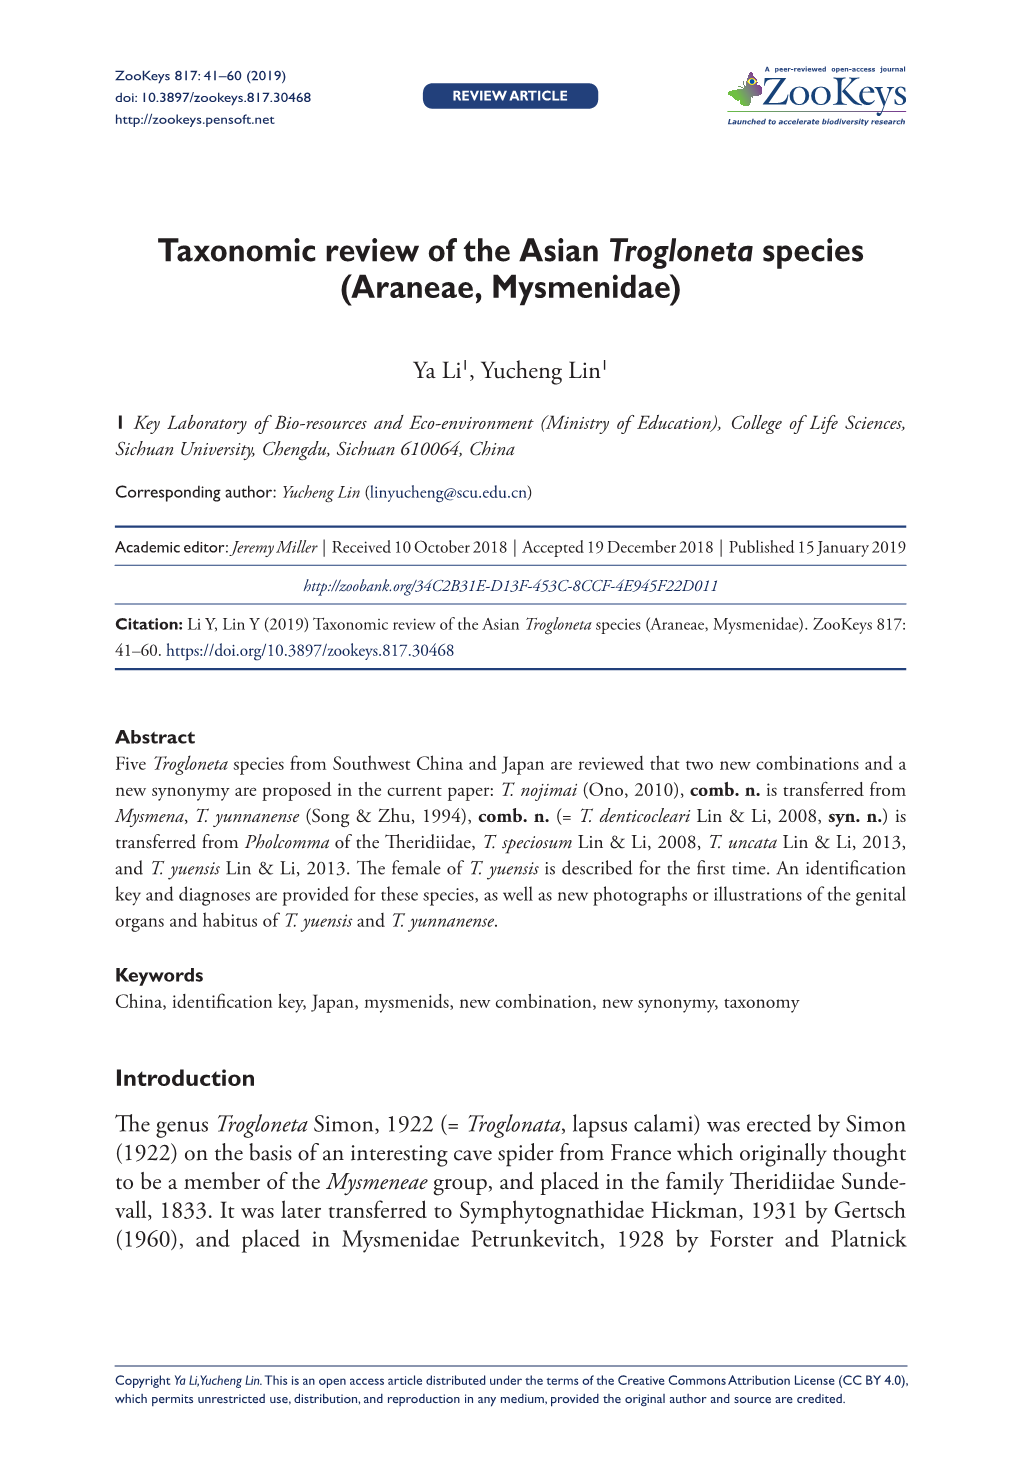 Araneae, Mysmenidae) 41 Doi: 10.3897/Zookeys.817.30468 REVIEW ARTICLE Launched to Accelerate Biodiversity Research